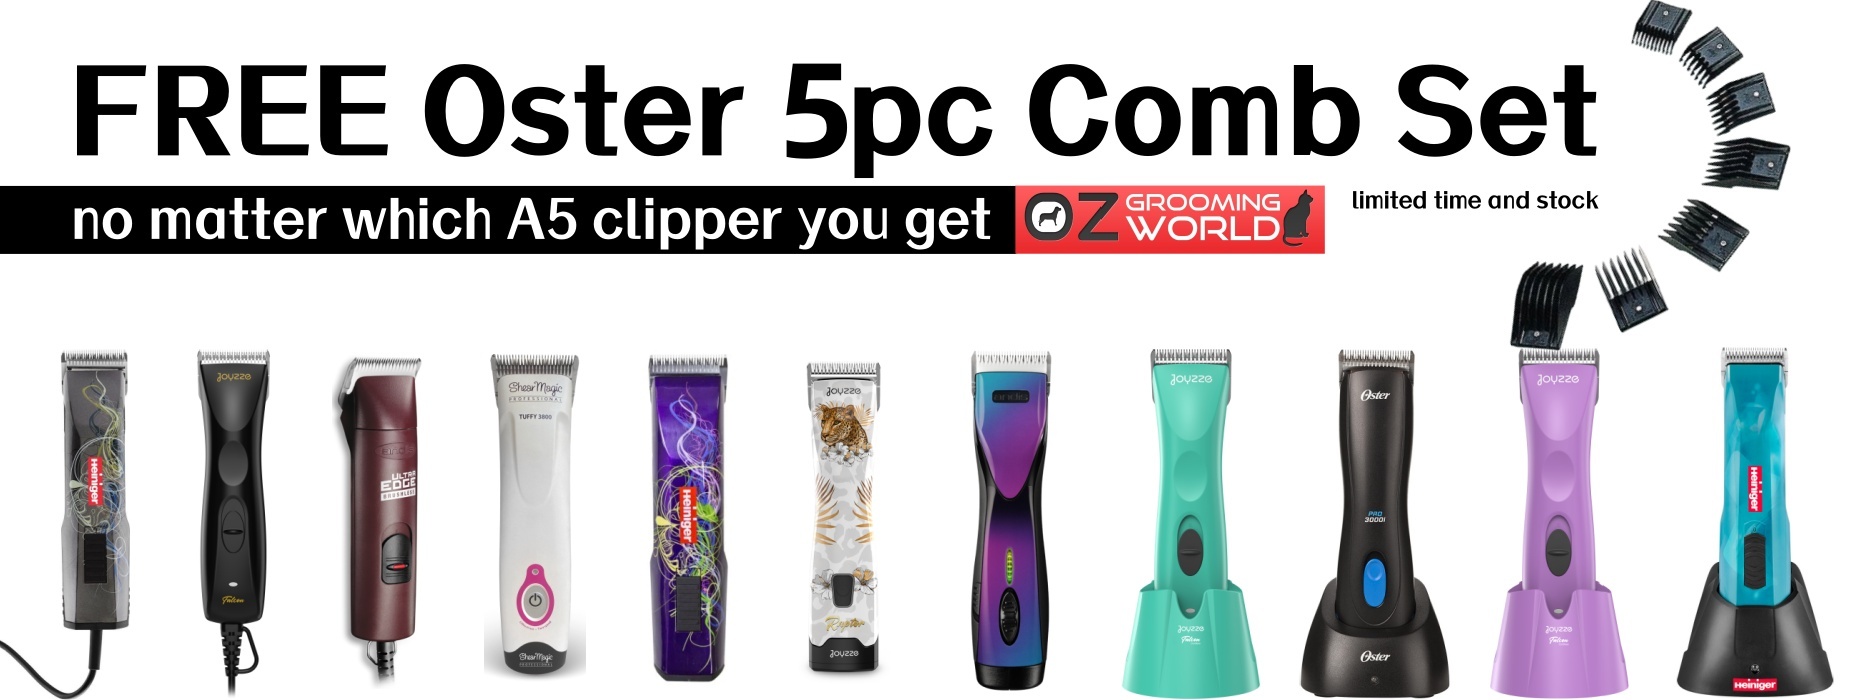 free oster 6pc comb